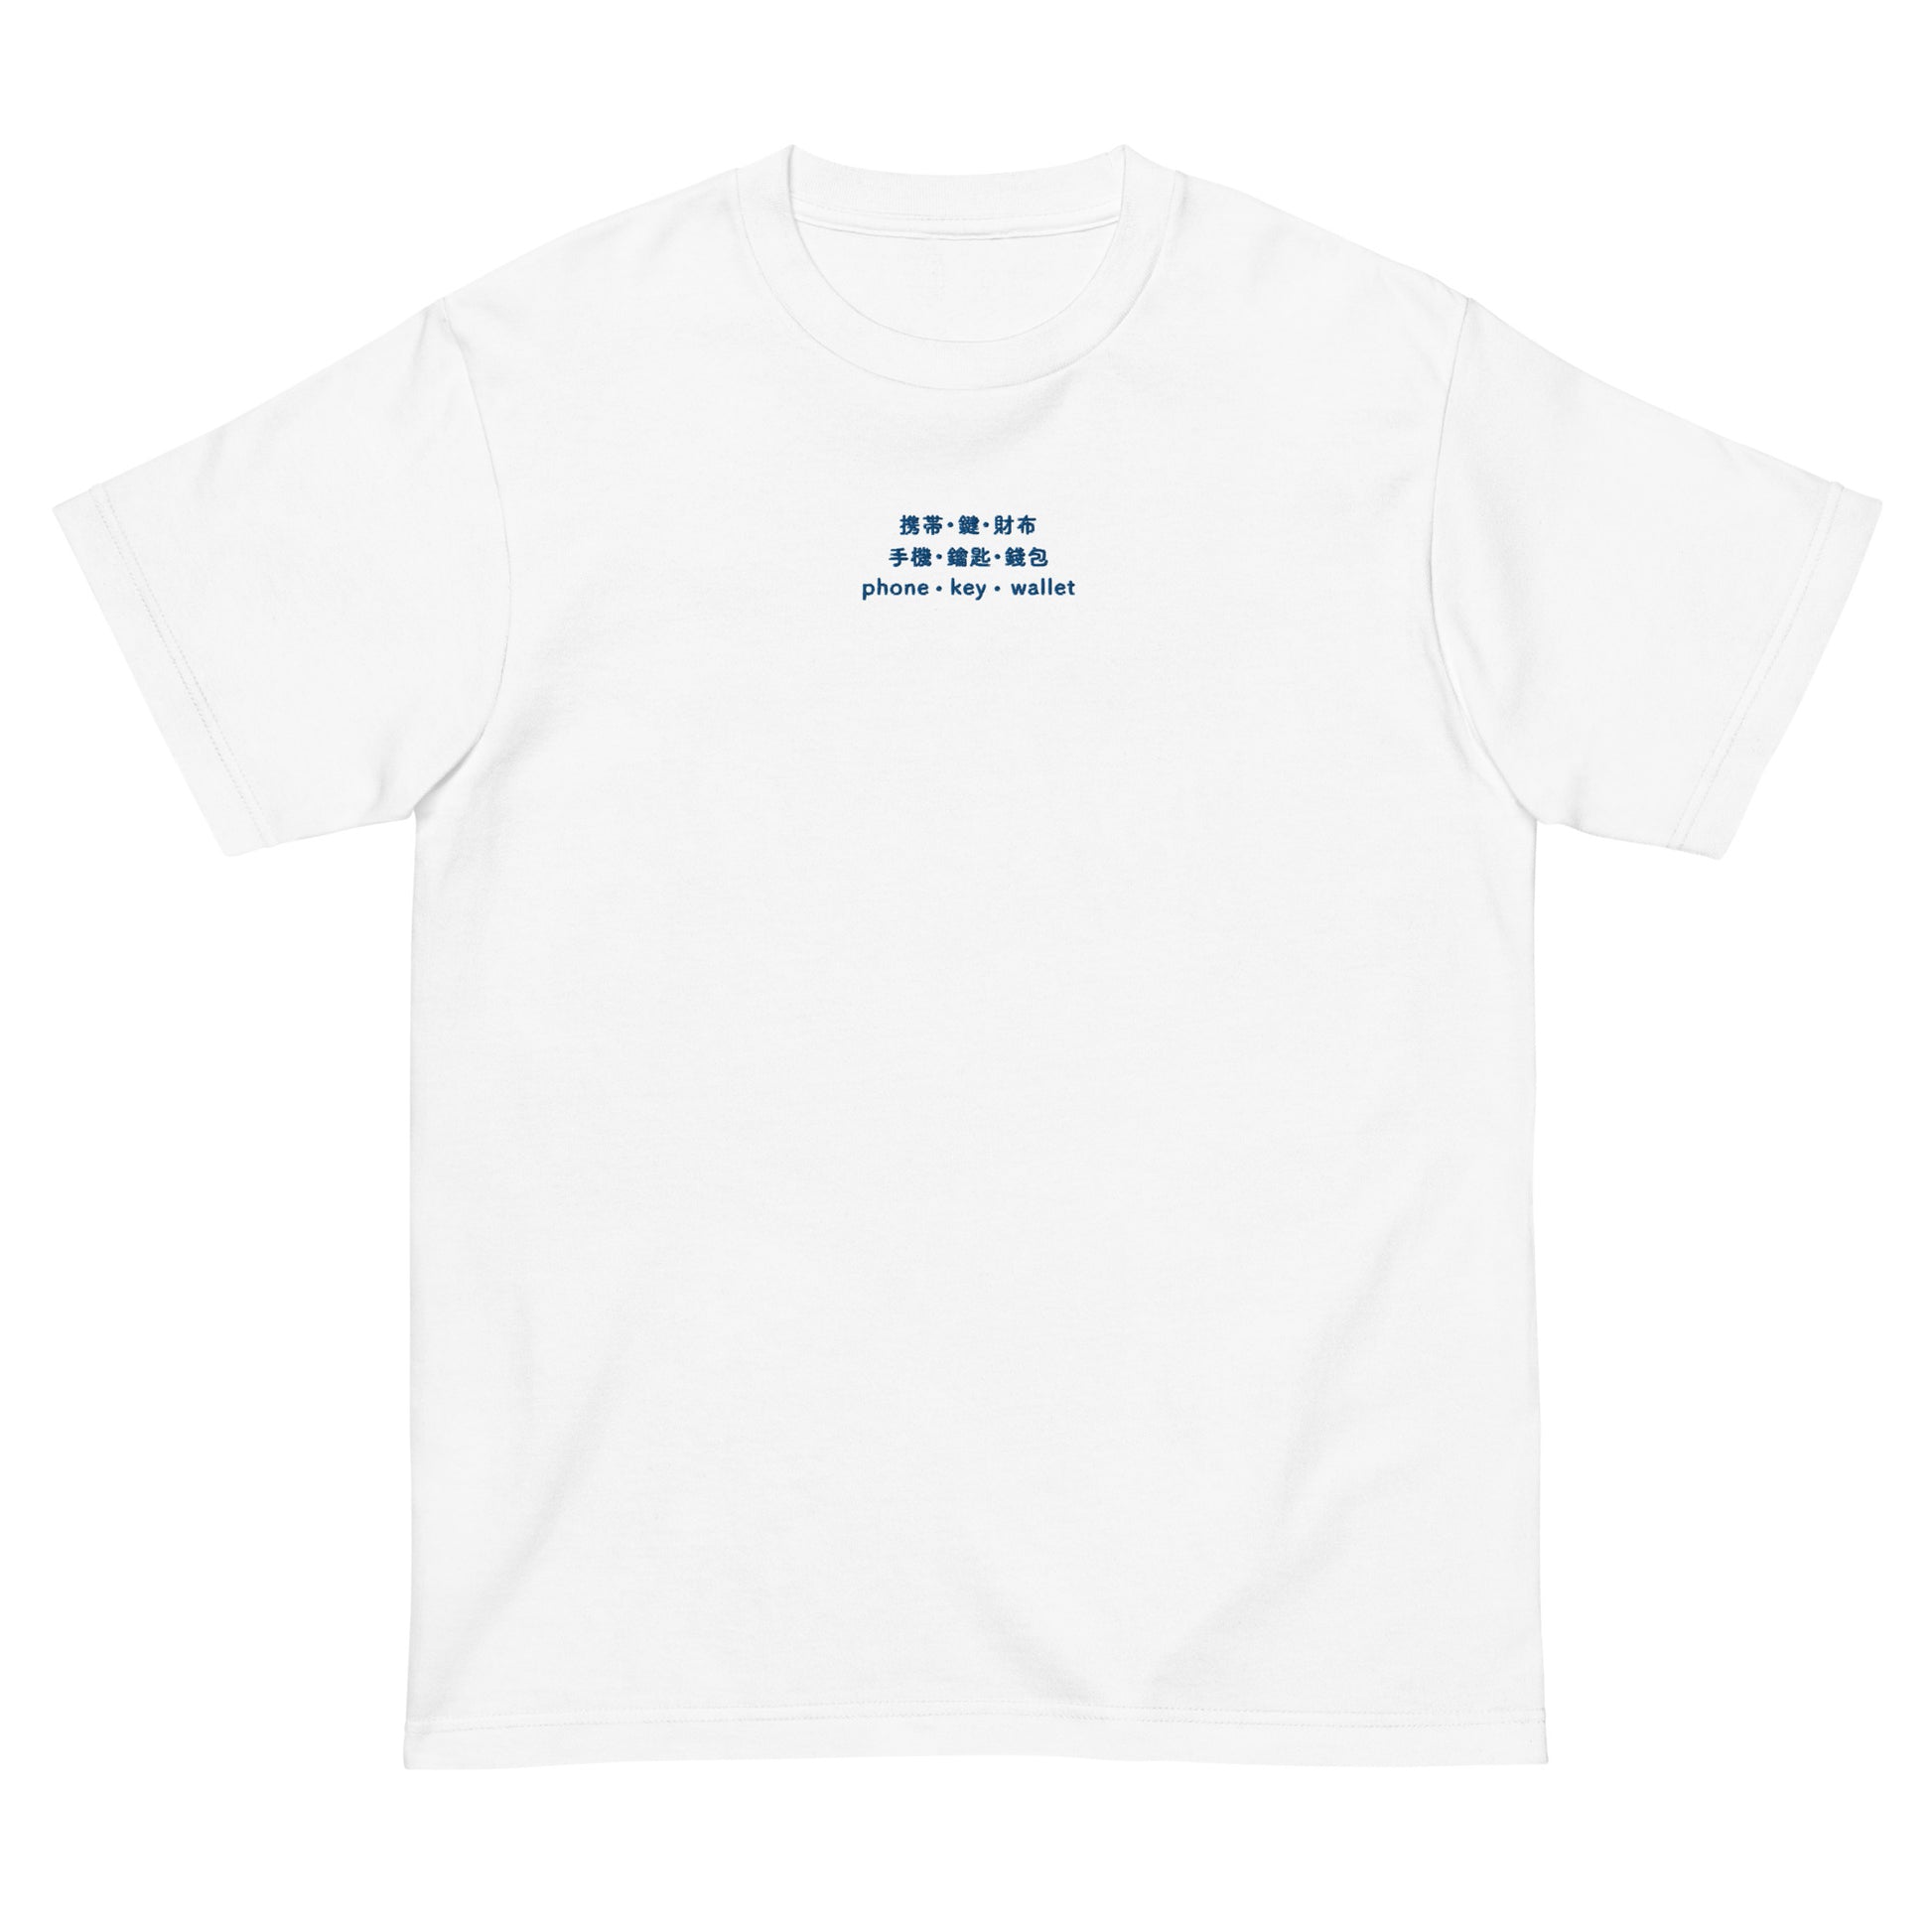 White High Quality Tee - Front Design with an Blue Embroidery "Phone/Key/Wallet" in Japanese,Chinese and English